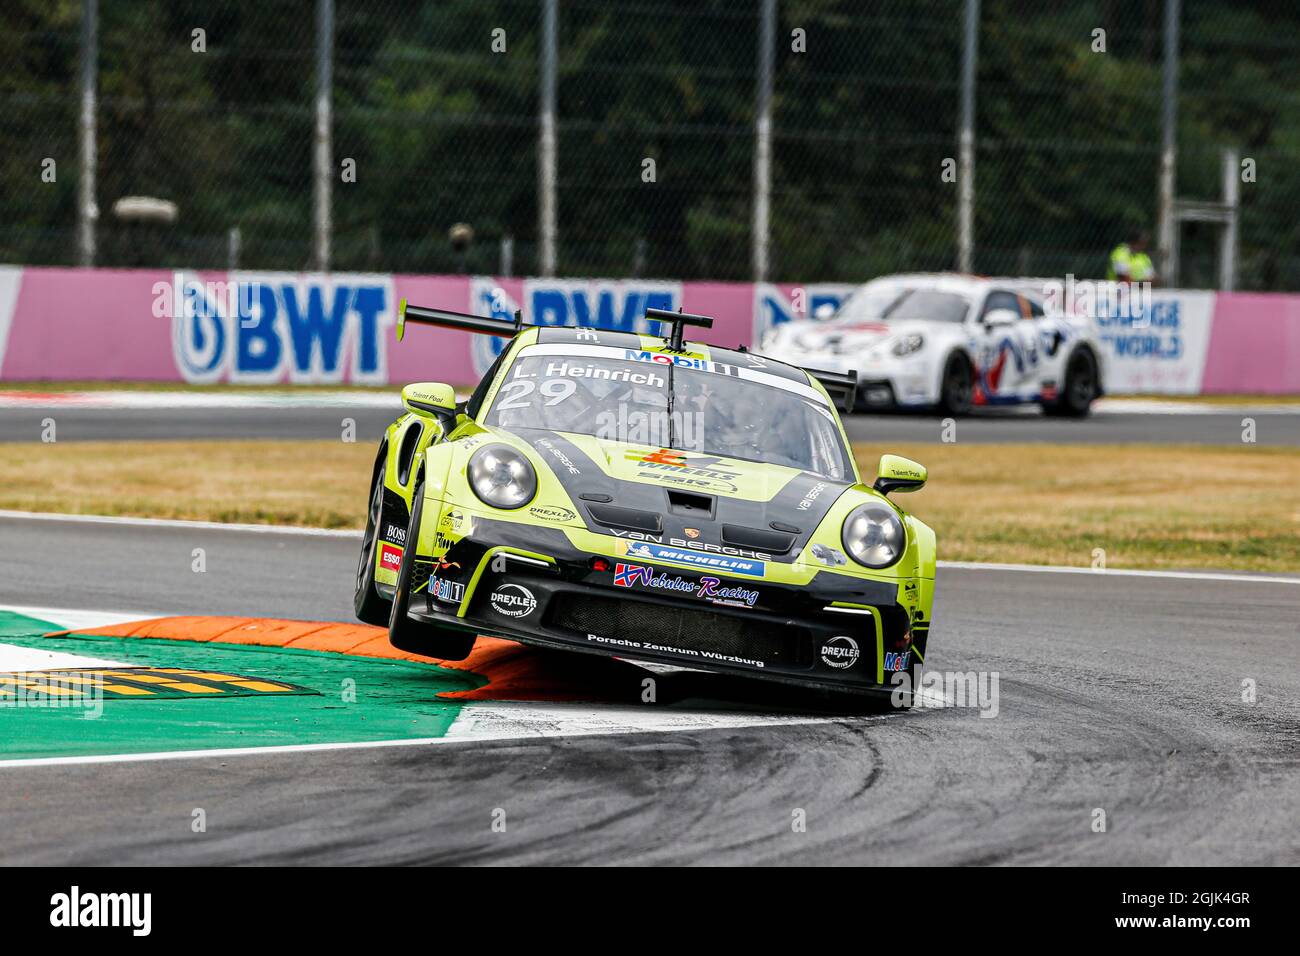 Monza, Italy. 10th Sep, 2021. # 29 Laurin Heinrich (D, Nebulus Racing by Huber), Porsche Mobil 1 Supercup at Autodromo Nazionale Monza on September 10, 2021 in Monza, Italy. (Photo by HOCH ZWEI) Credit: dpa/Alamy Live News Stock Photo